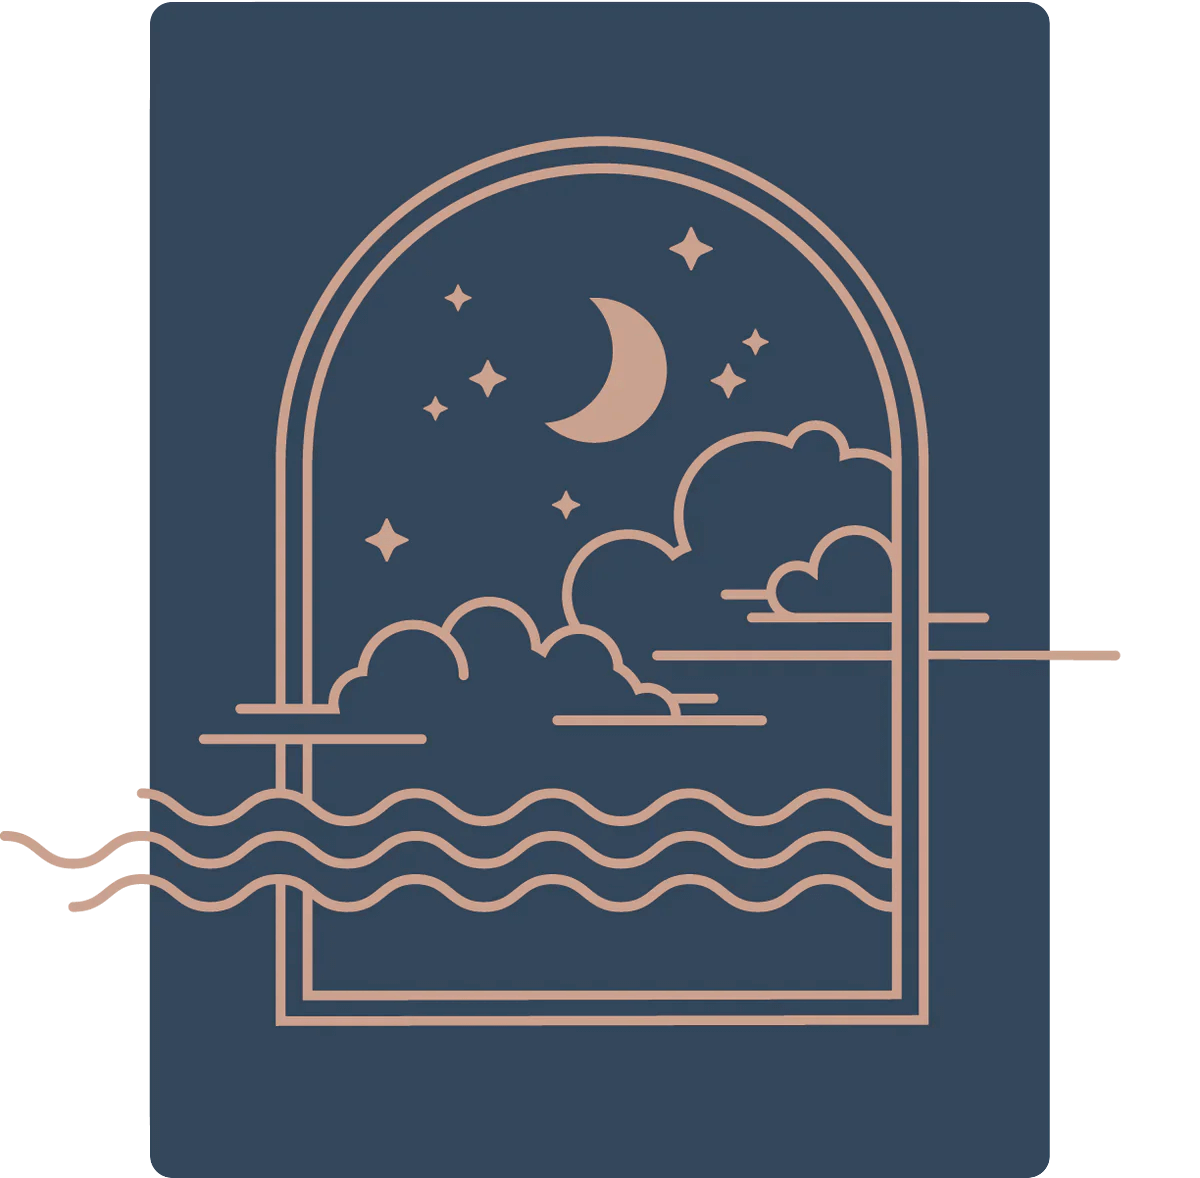 Cute illustration looking out window at night sky, moon and stars